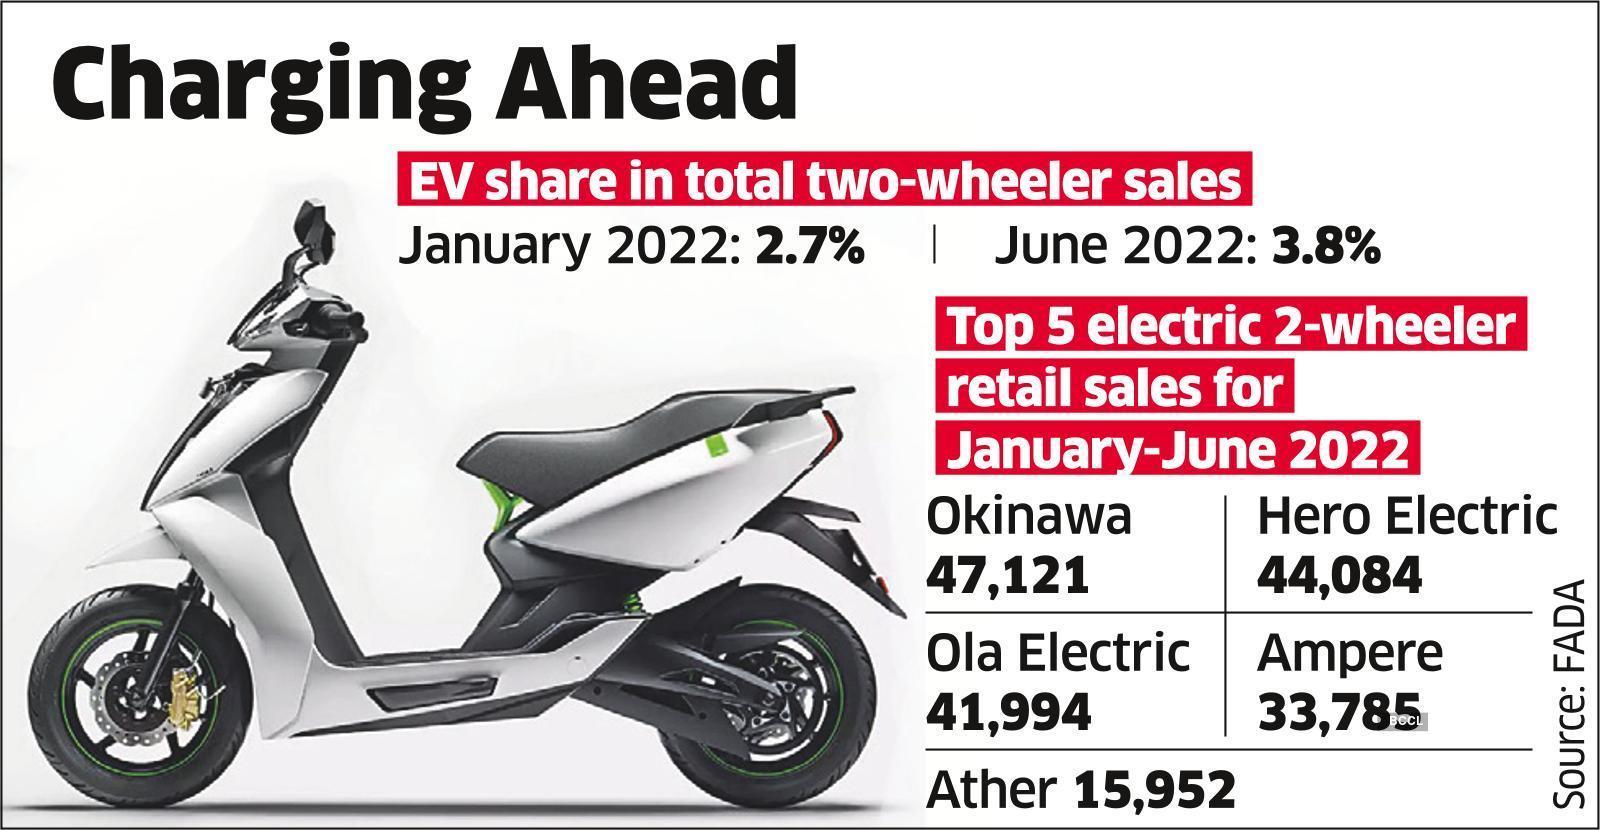 Sub-Rs one lakh e-scooters in demand as sales dip for two-wheelers